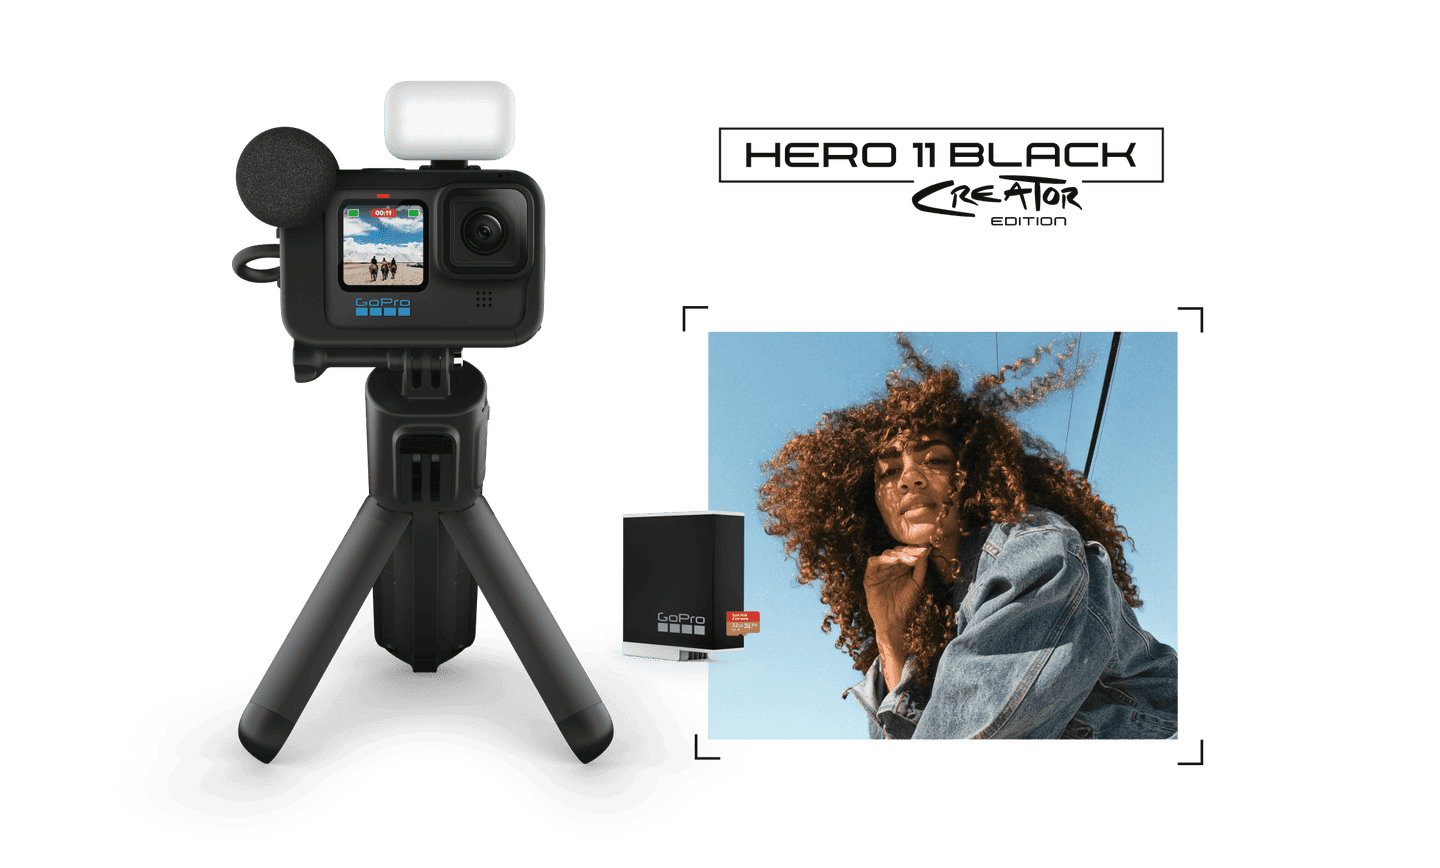 GoPro Launches New Hero11 Black Lineup to Take On DJI and Insta360